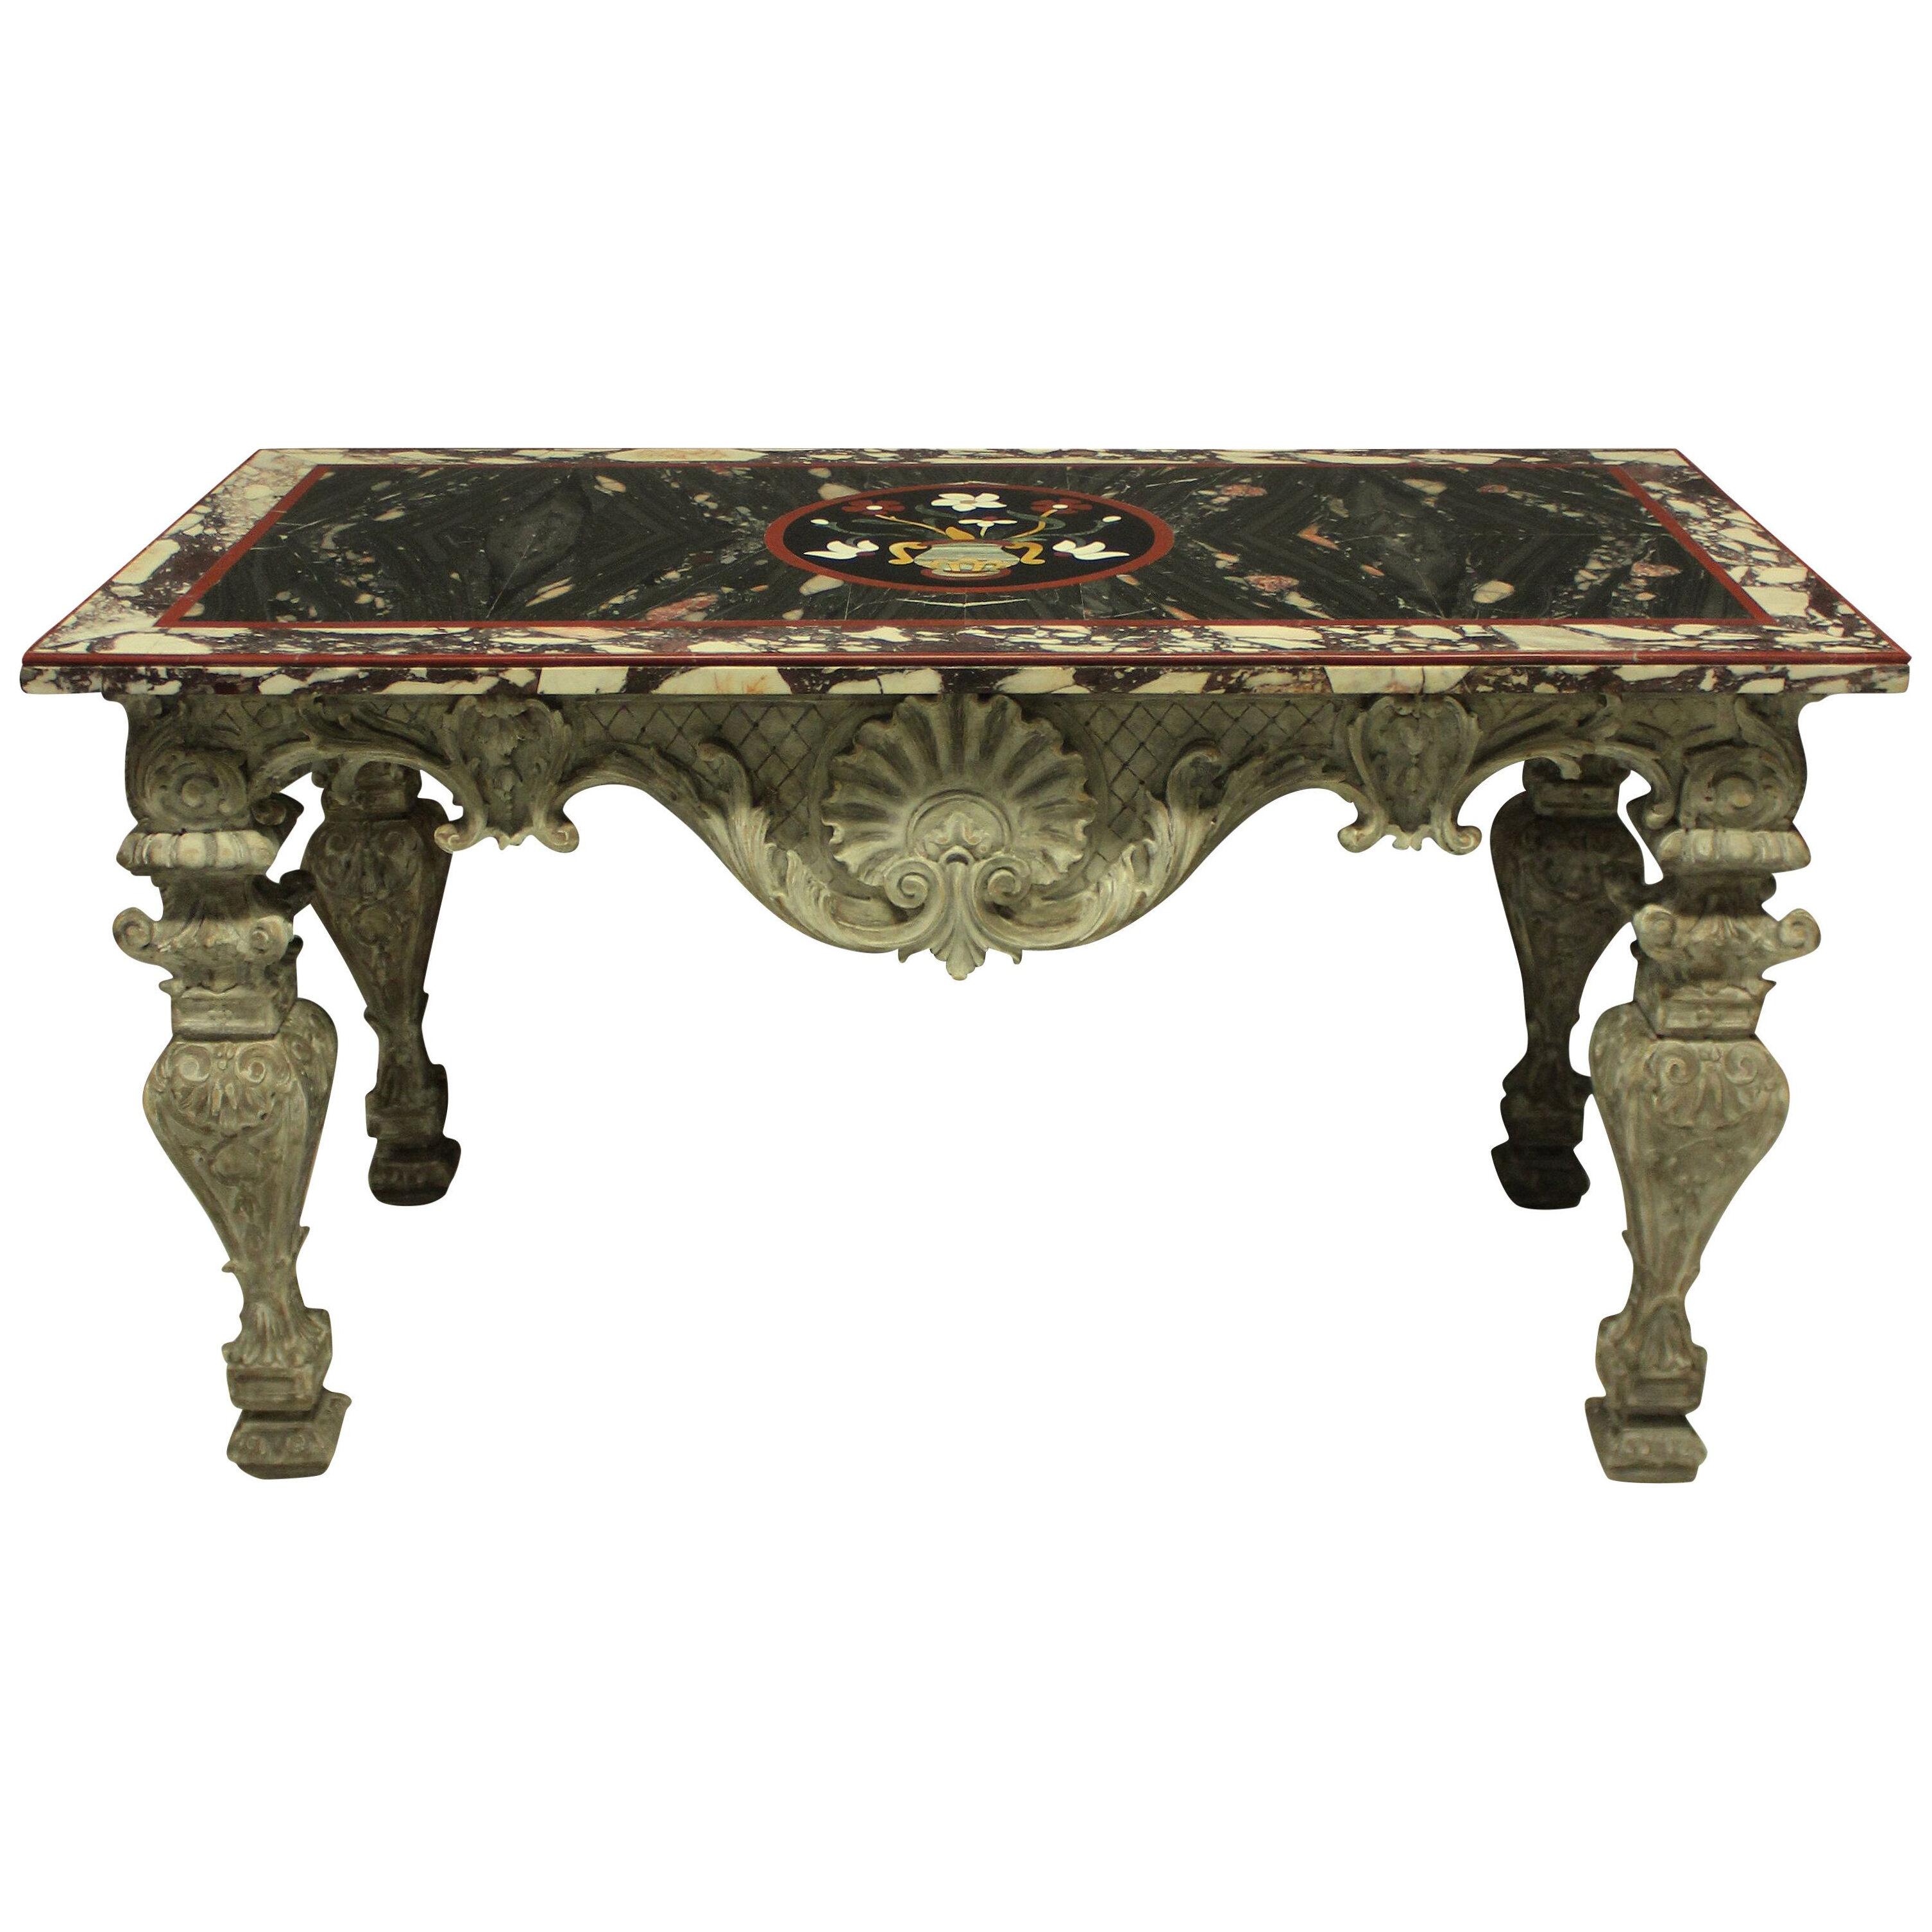 AN ITALIAN BAROQUE CARVED & PAINTED PIETRA DURA CENTRE TABLE